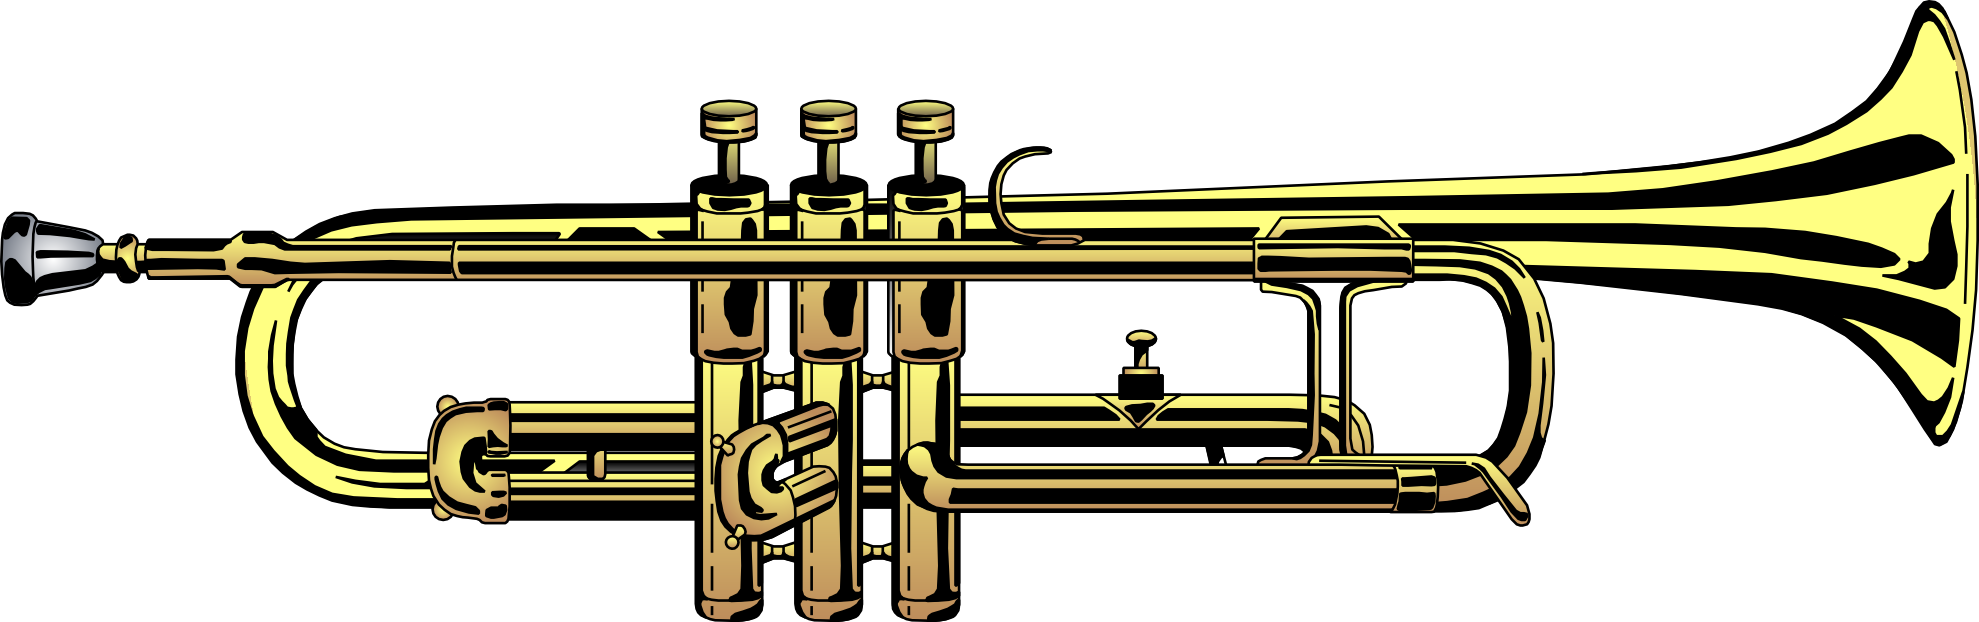 Clip Arts Related To : silhouette trumpet clipart. view all trumpet-clipart...